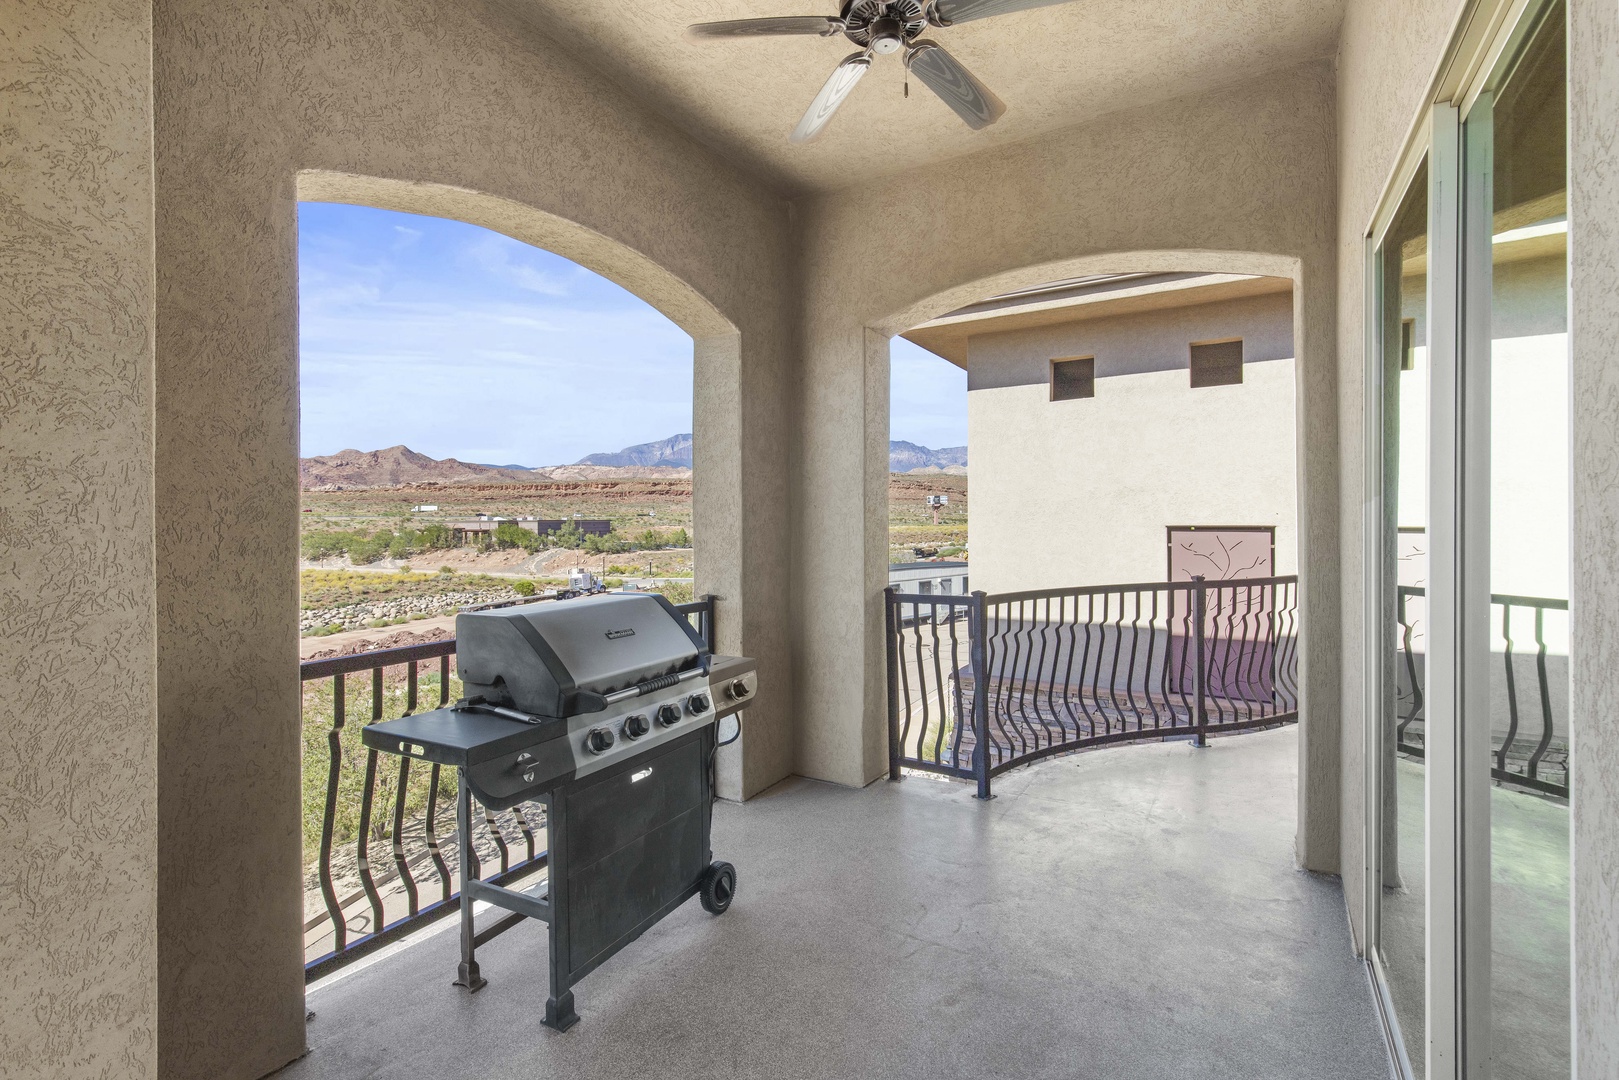 Relax on the balcony with gorgeous desert views while you grill up a feast!